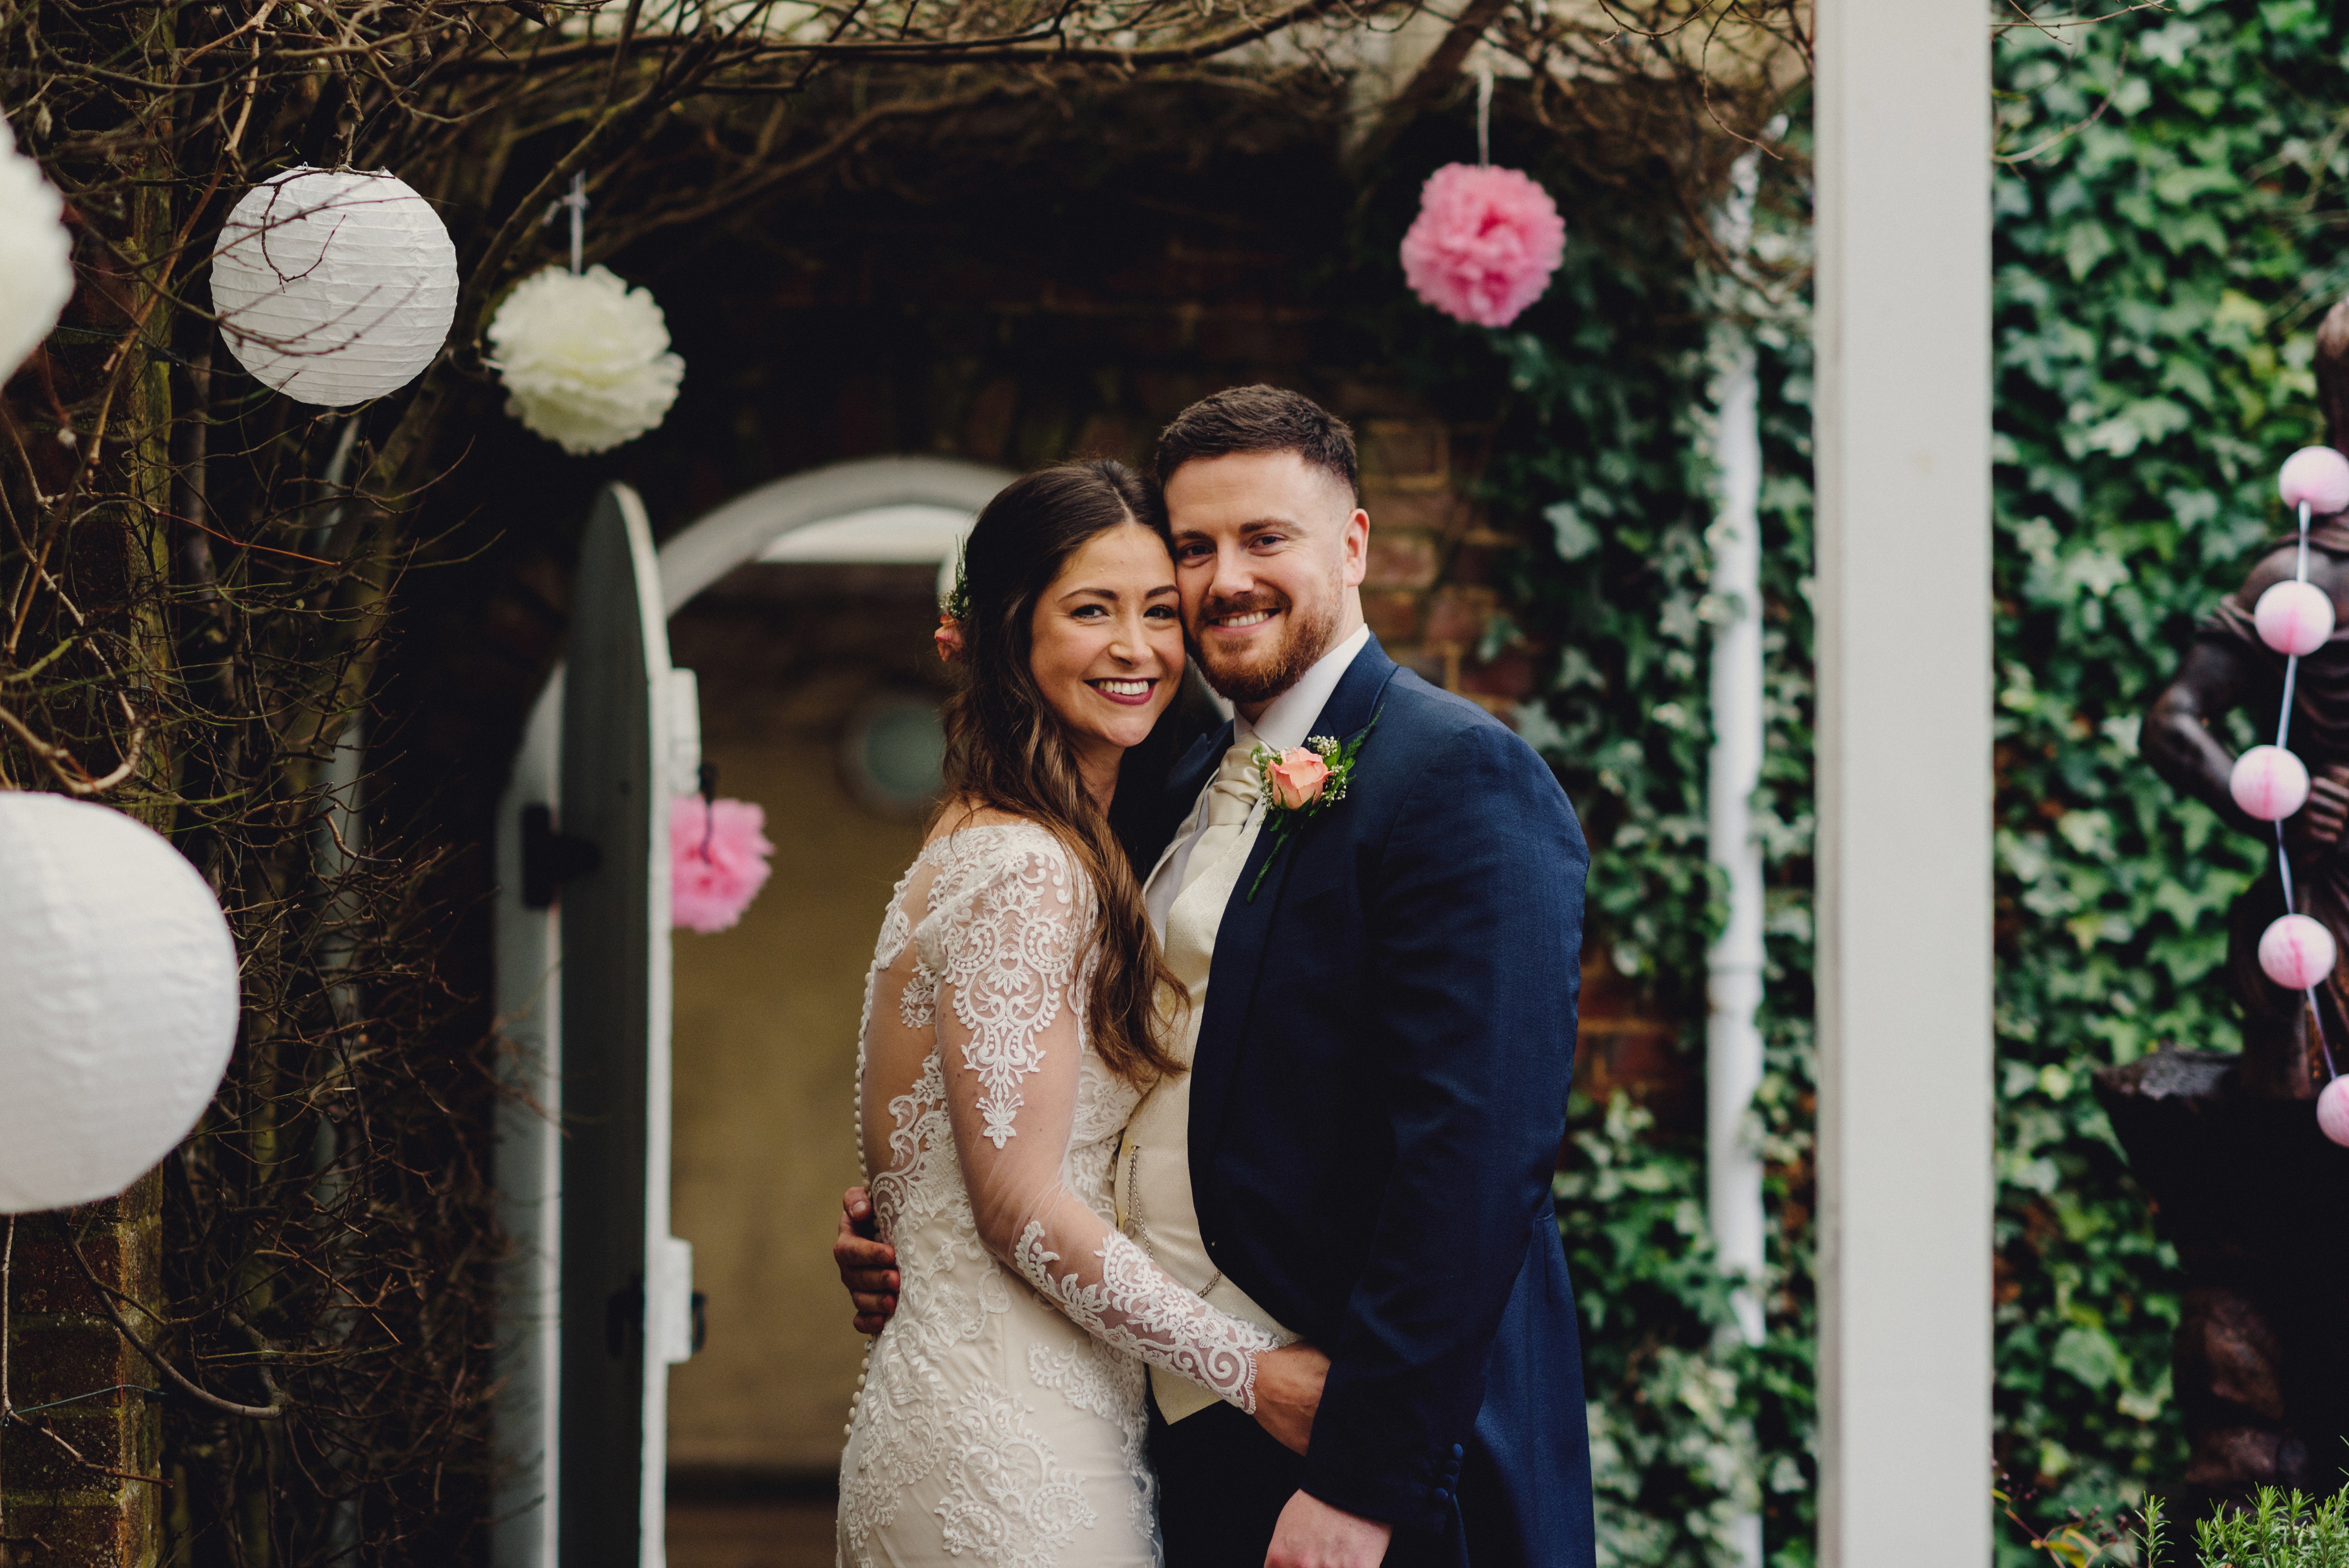 Tess & Tom’s stunning blush, cream and green wedding at Northbrook Park, with MIKI Photography